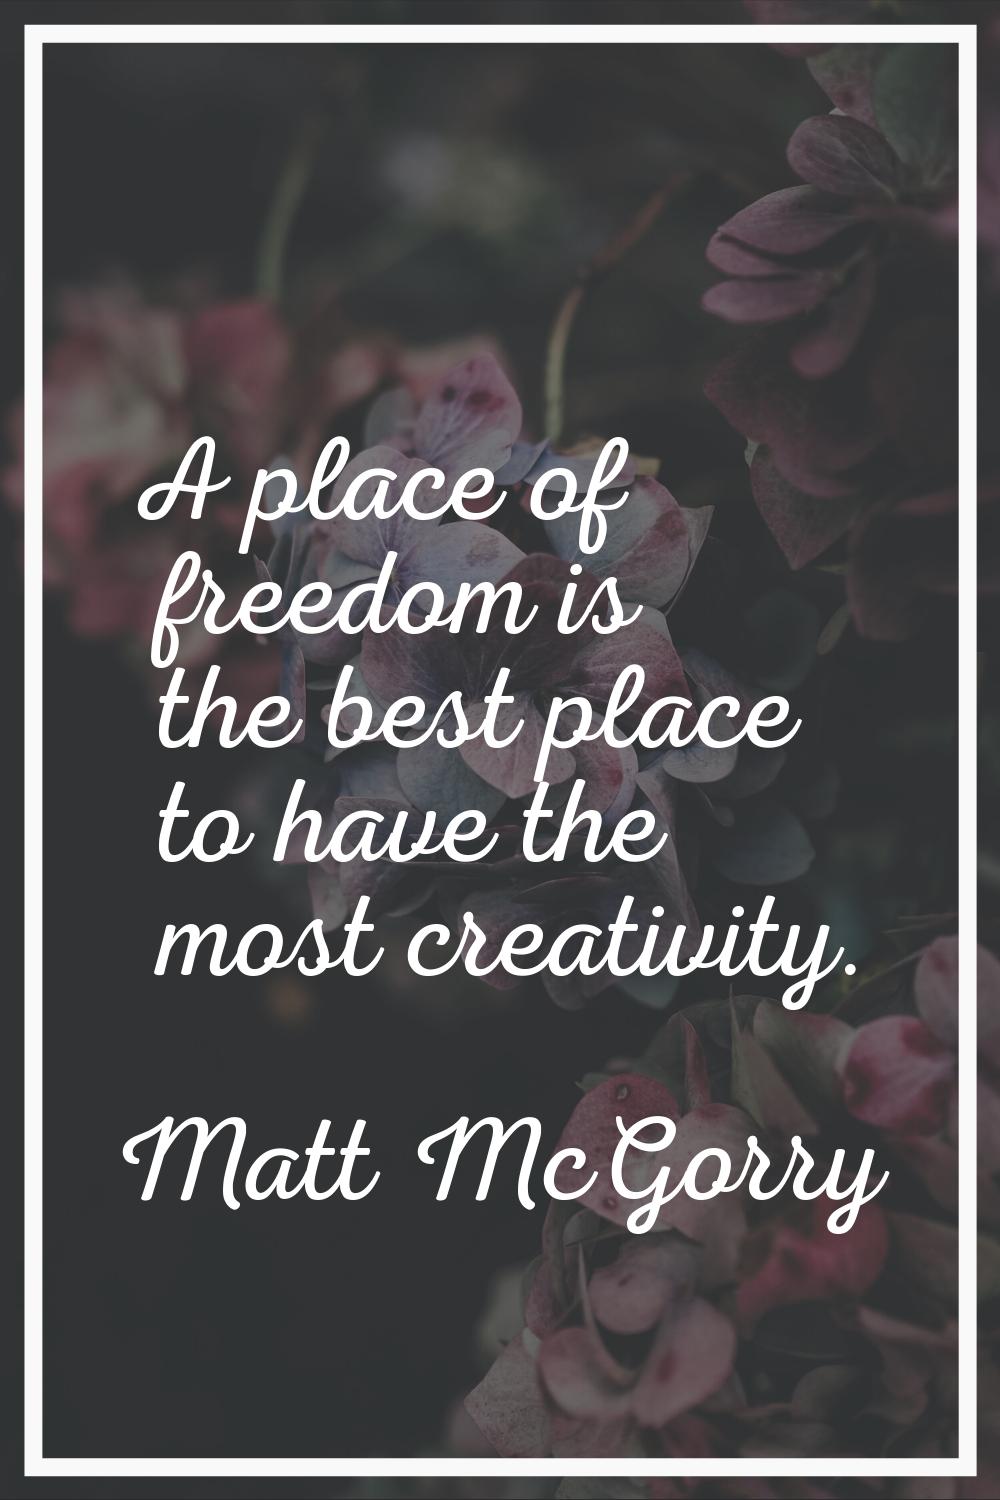 A place of freedom is the best place to have the most creativity.